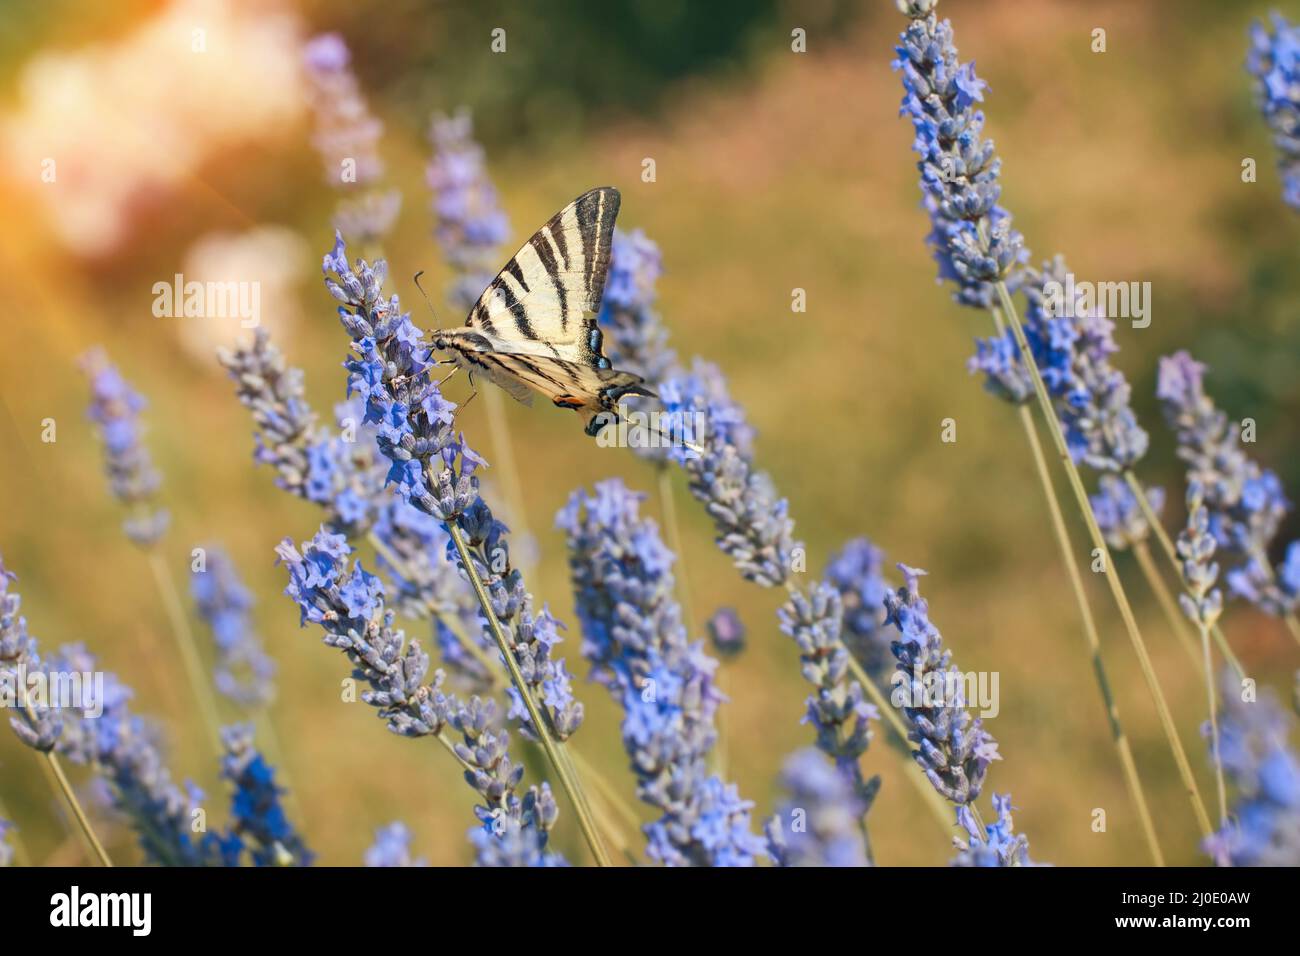 A yellow swallowtail butterfly Stock Photo